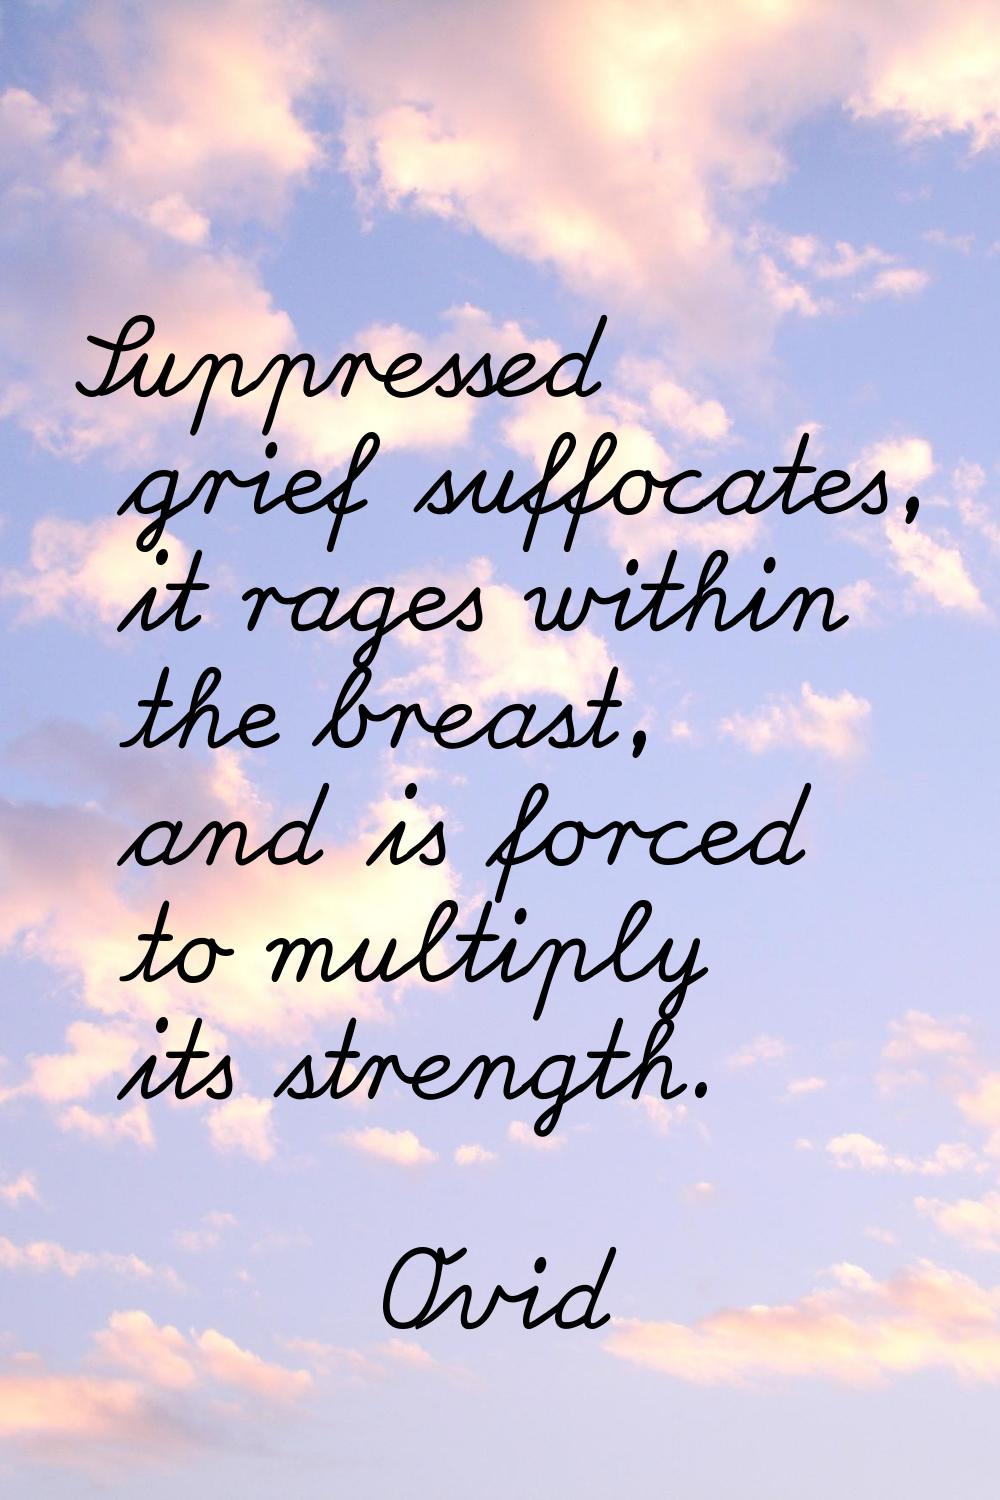 Suppressed grief suffocates, it rages within the breast, and is forced to multiply its strength.